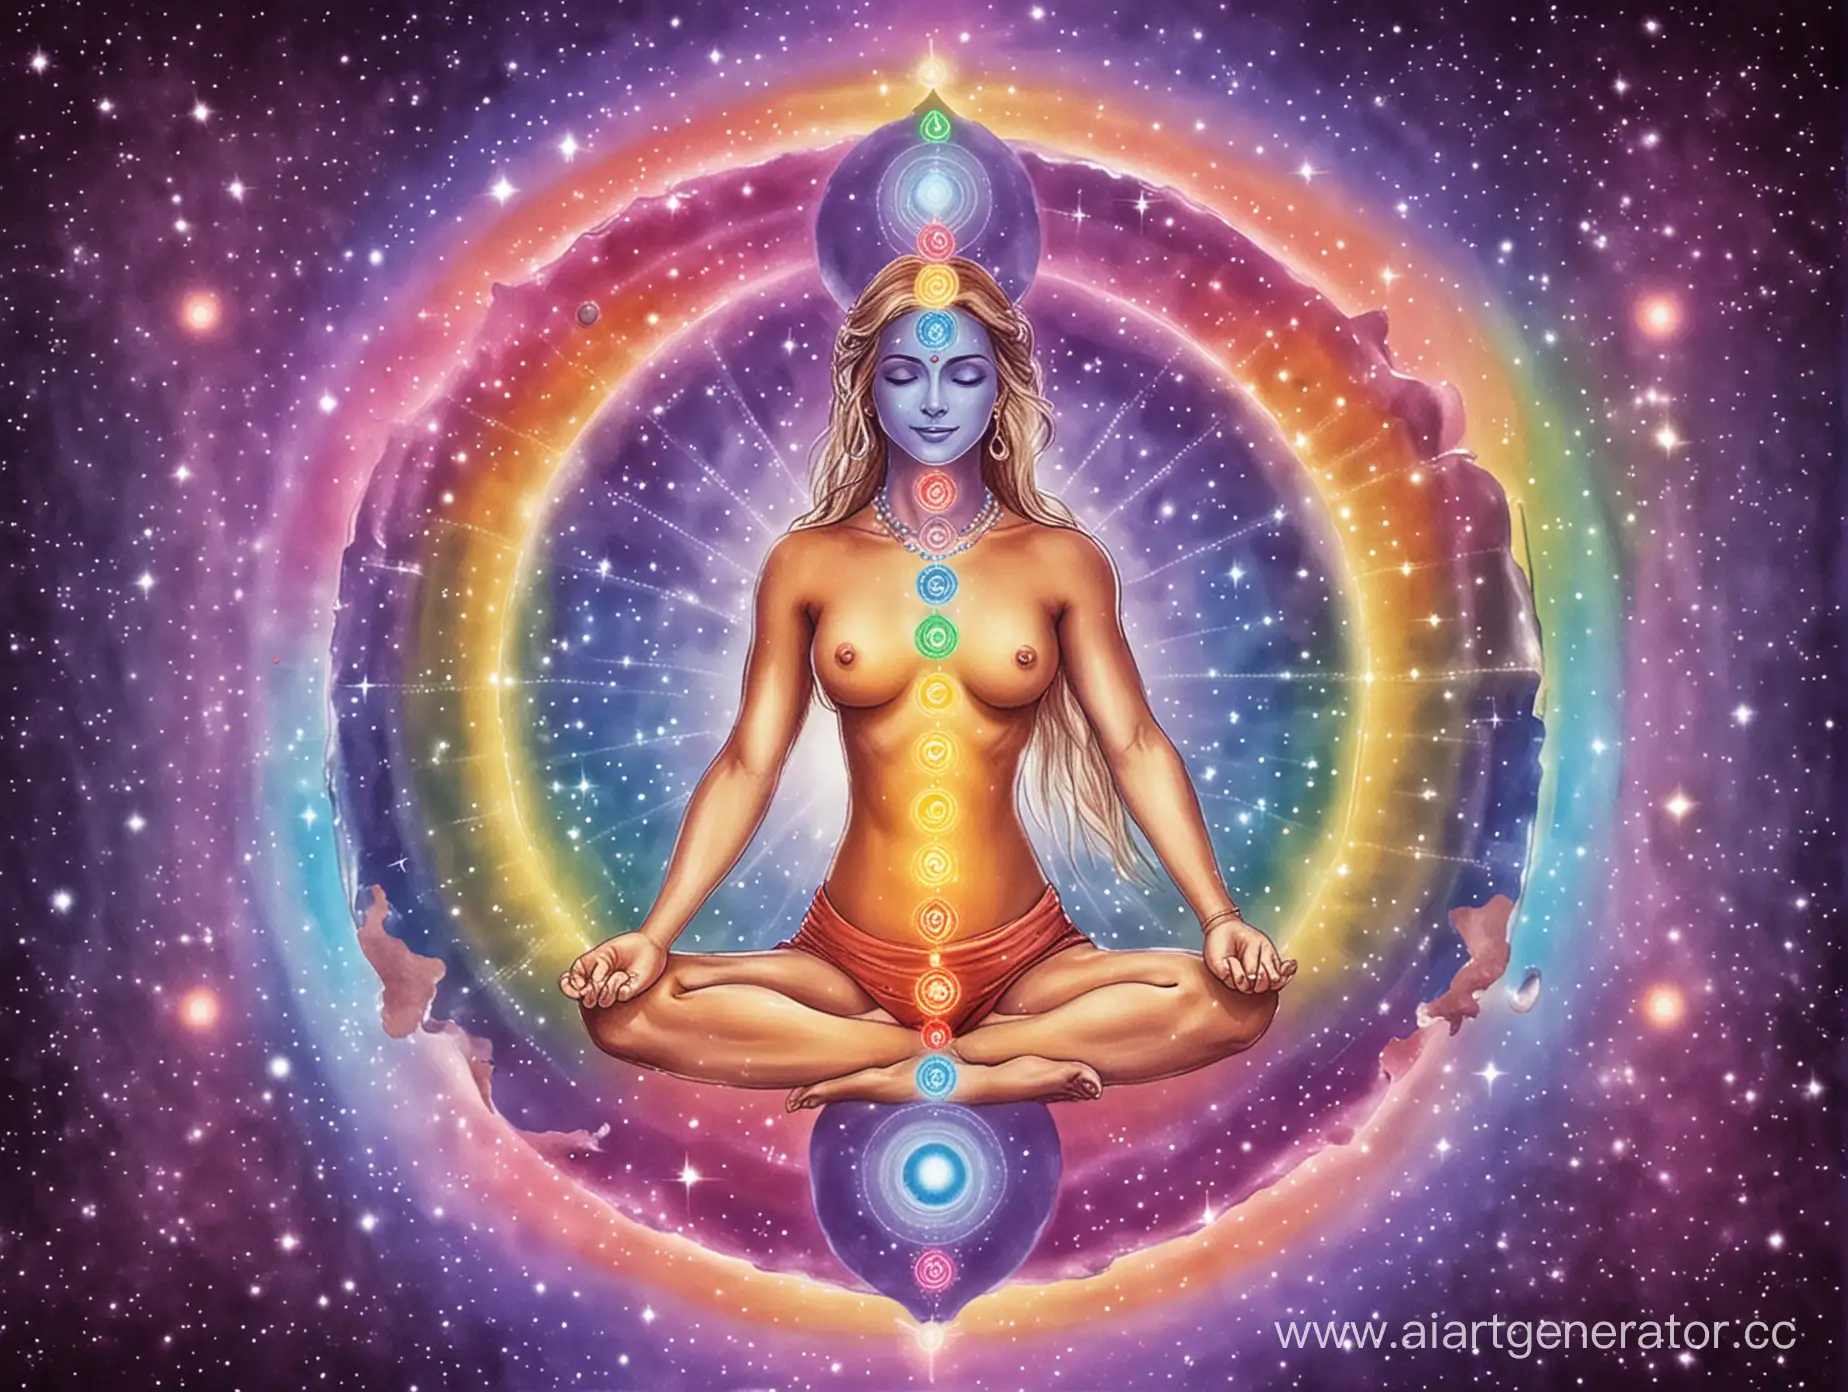 Cosmic-Chakras-Embracing-Love-and-Light-from-the-Source